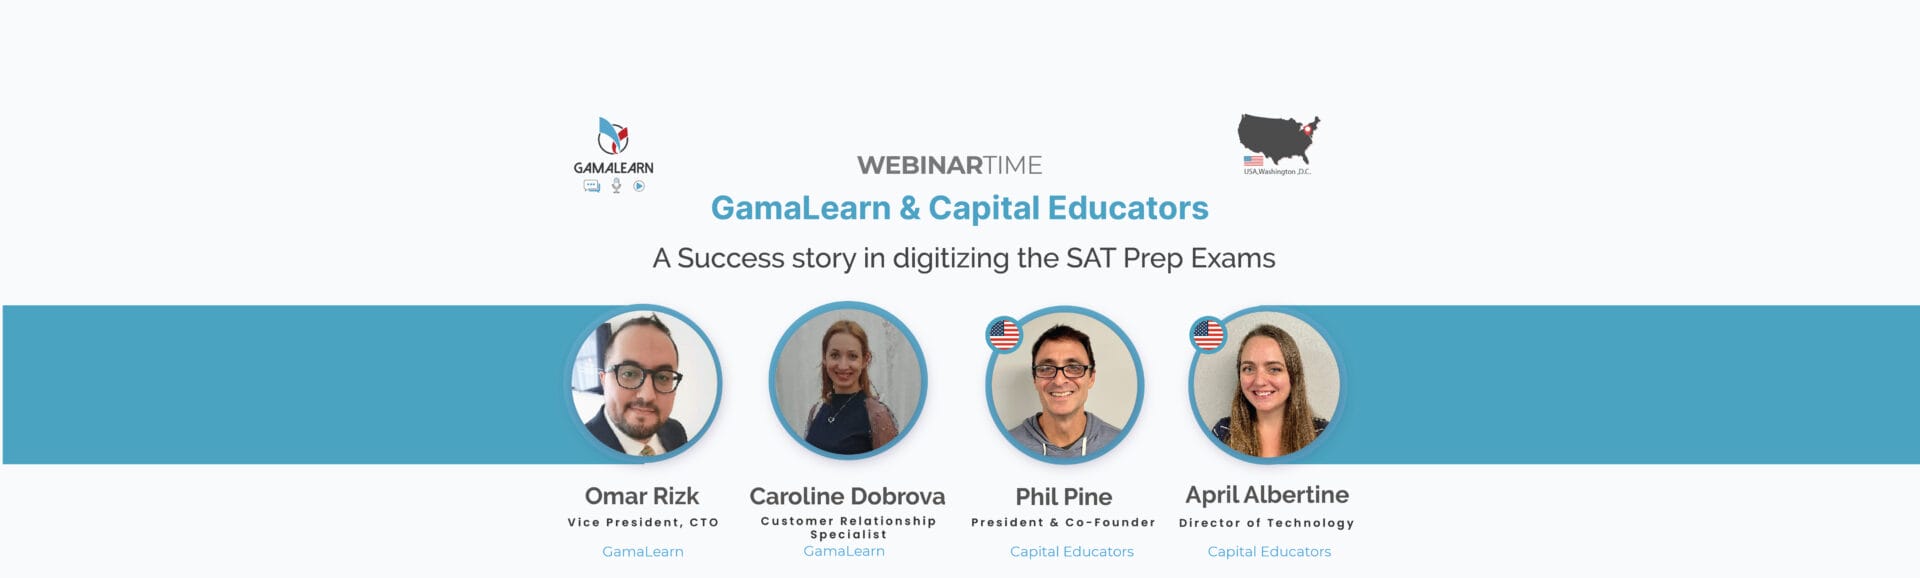 A Success Story in Digitizing the SAT Prep Exams